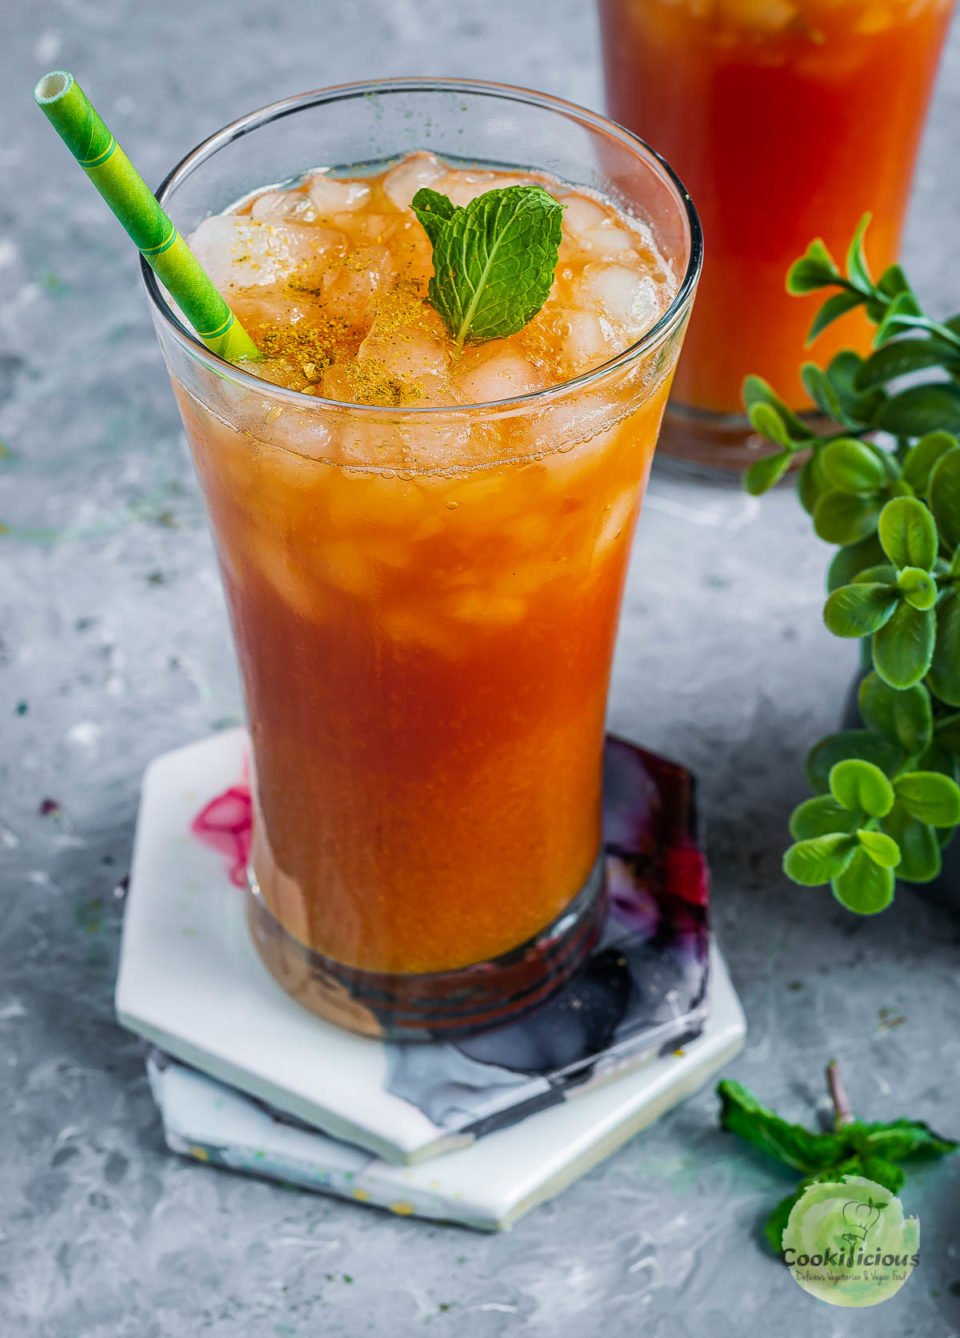 a tall glass filled with watermelon juice recipe - Sugar Free Drink garnished with mint leaves